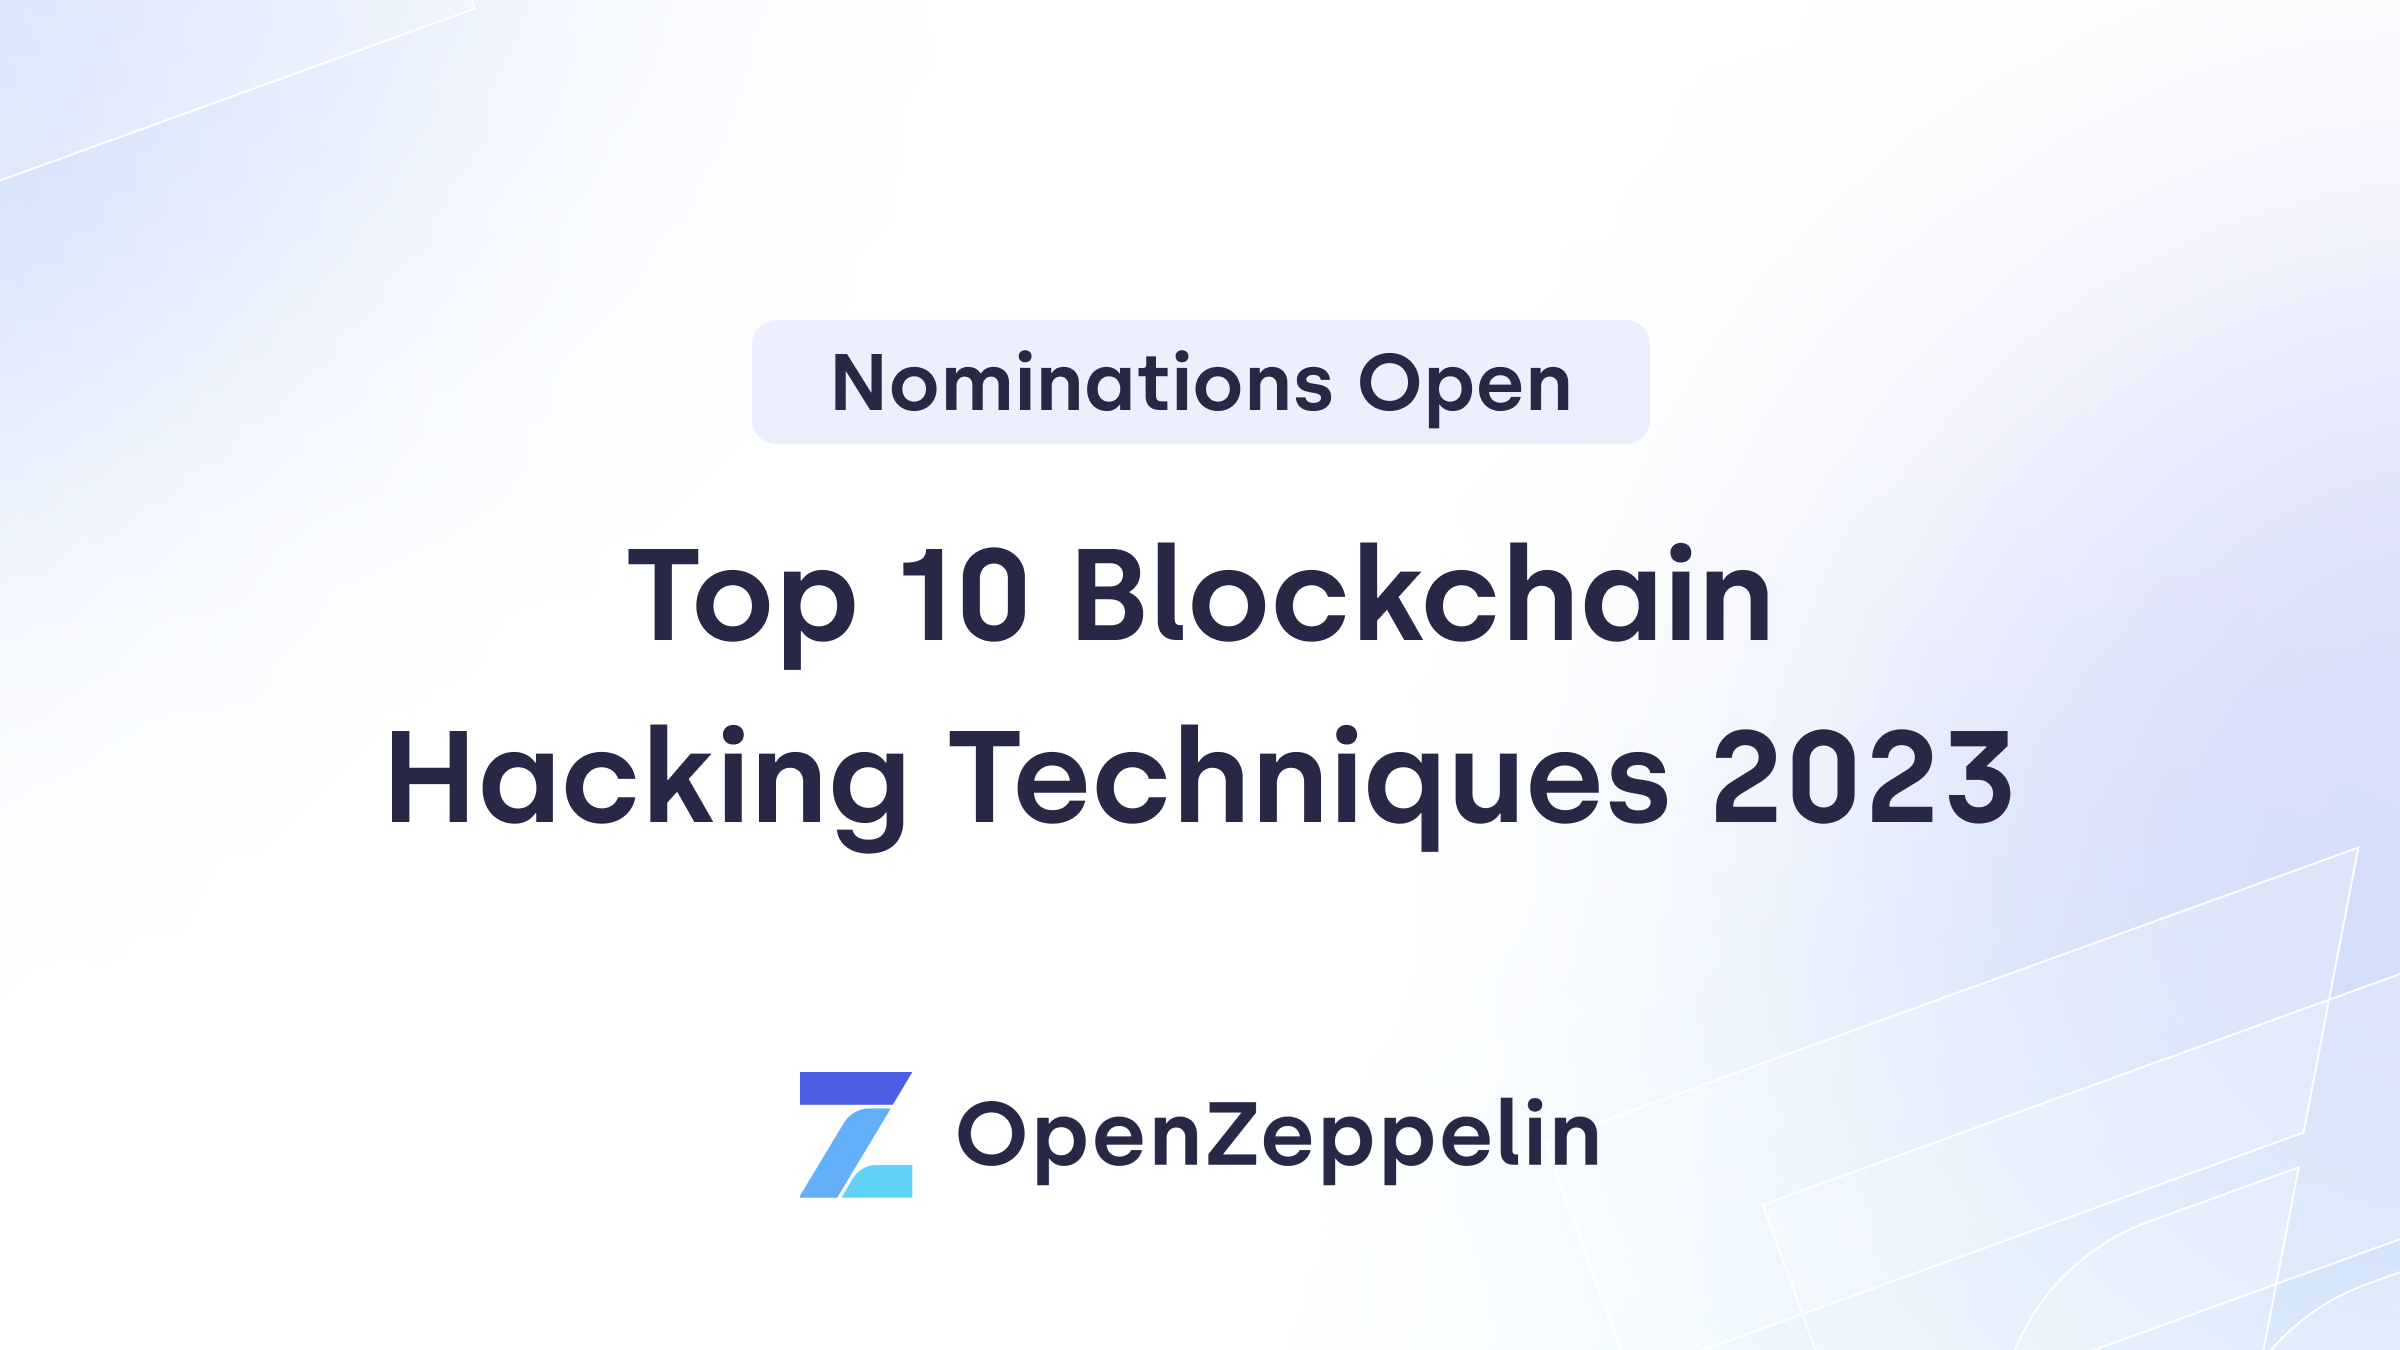 Top 10 Blockchain Hacking Techniques of 2023 - Voting Open! Featured Image